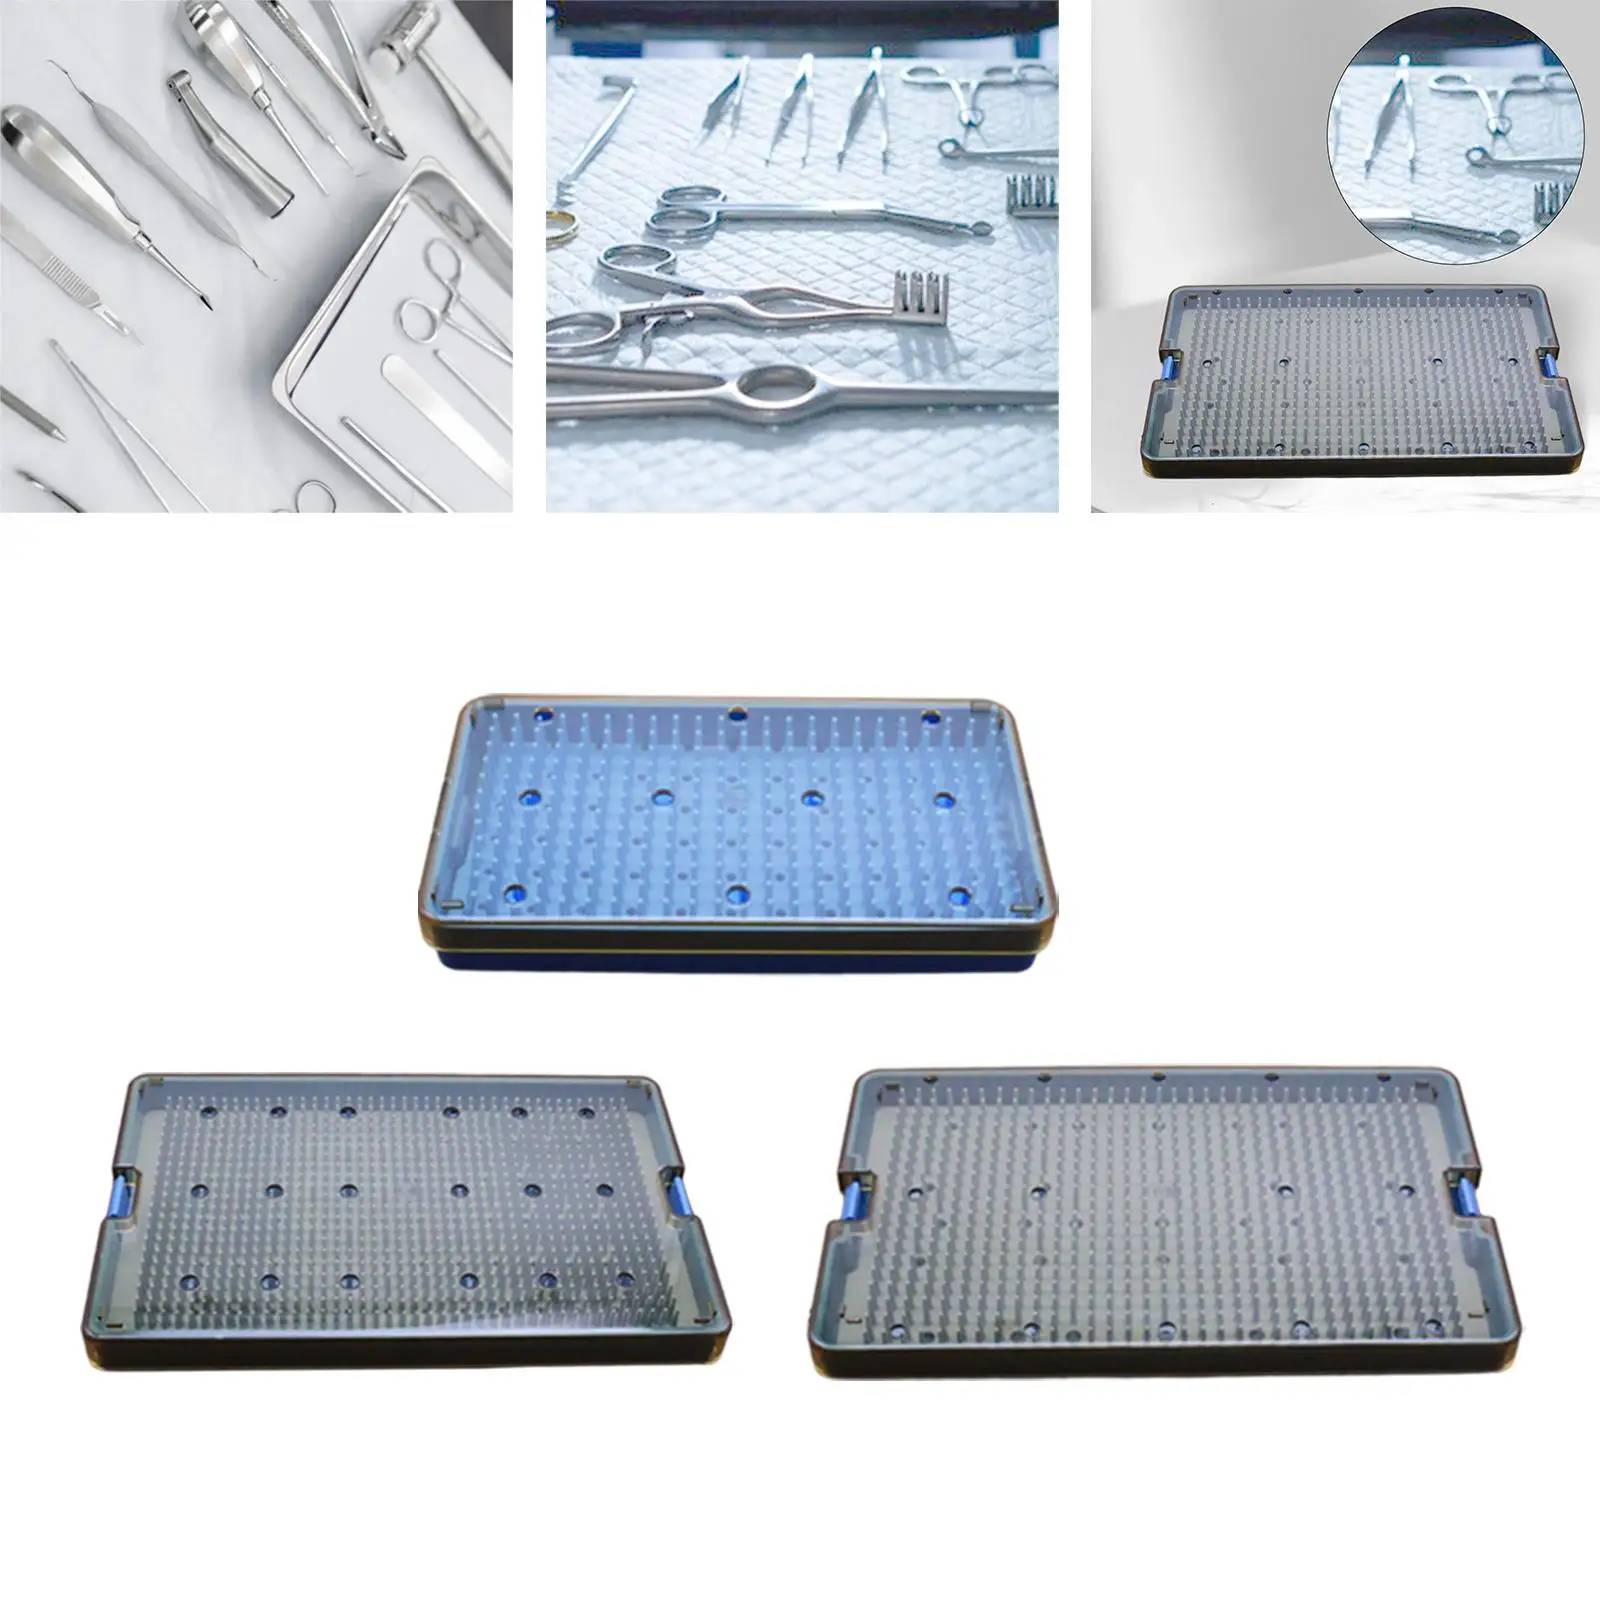 Sterilization Tray Rack Box Instruments Disinfection Box Autoclavable Box for Ophthalmic Surgery